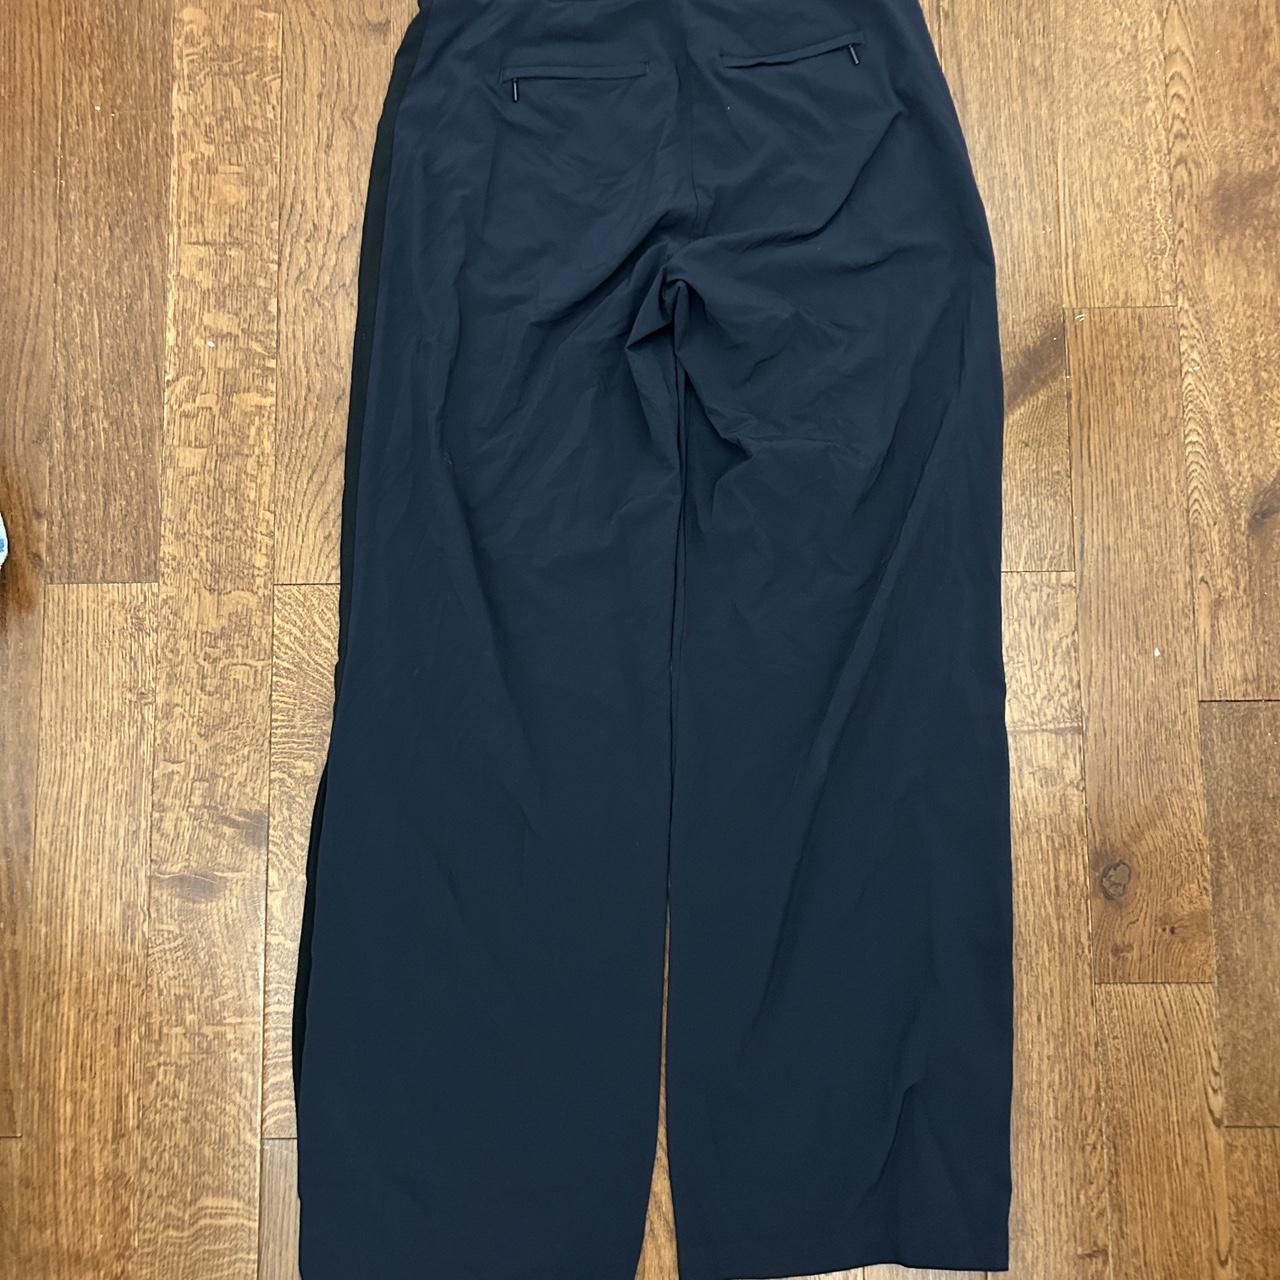 Athleta Women's Navy and Blue Trousers (2)